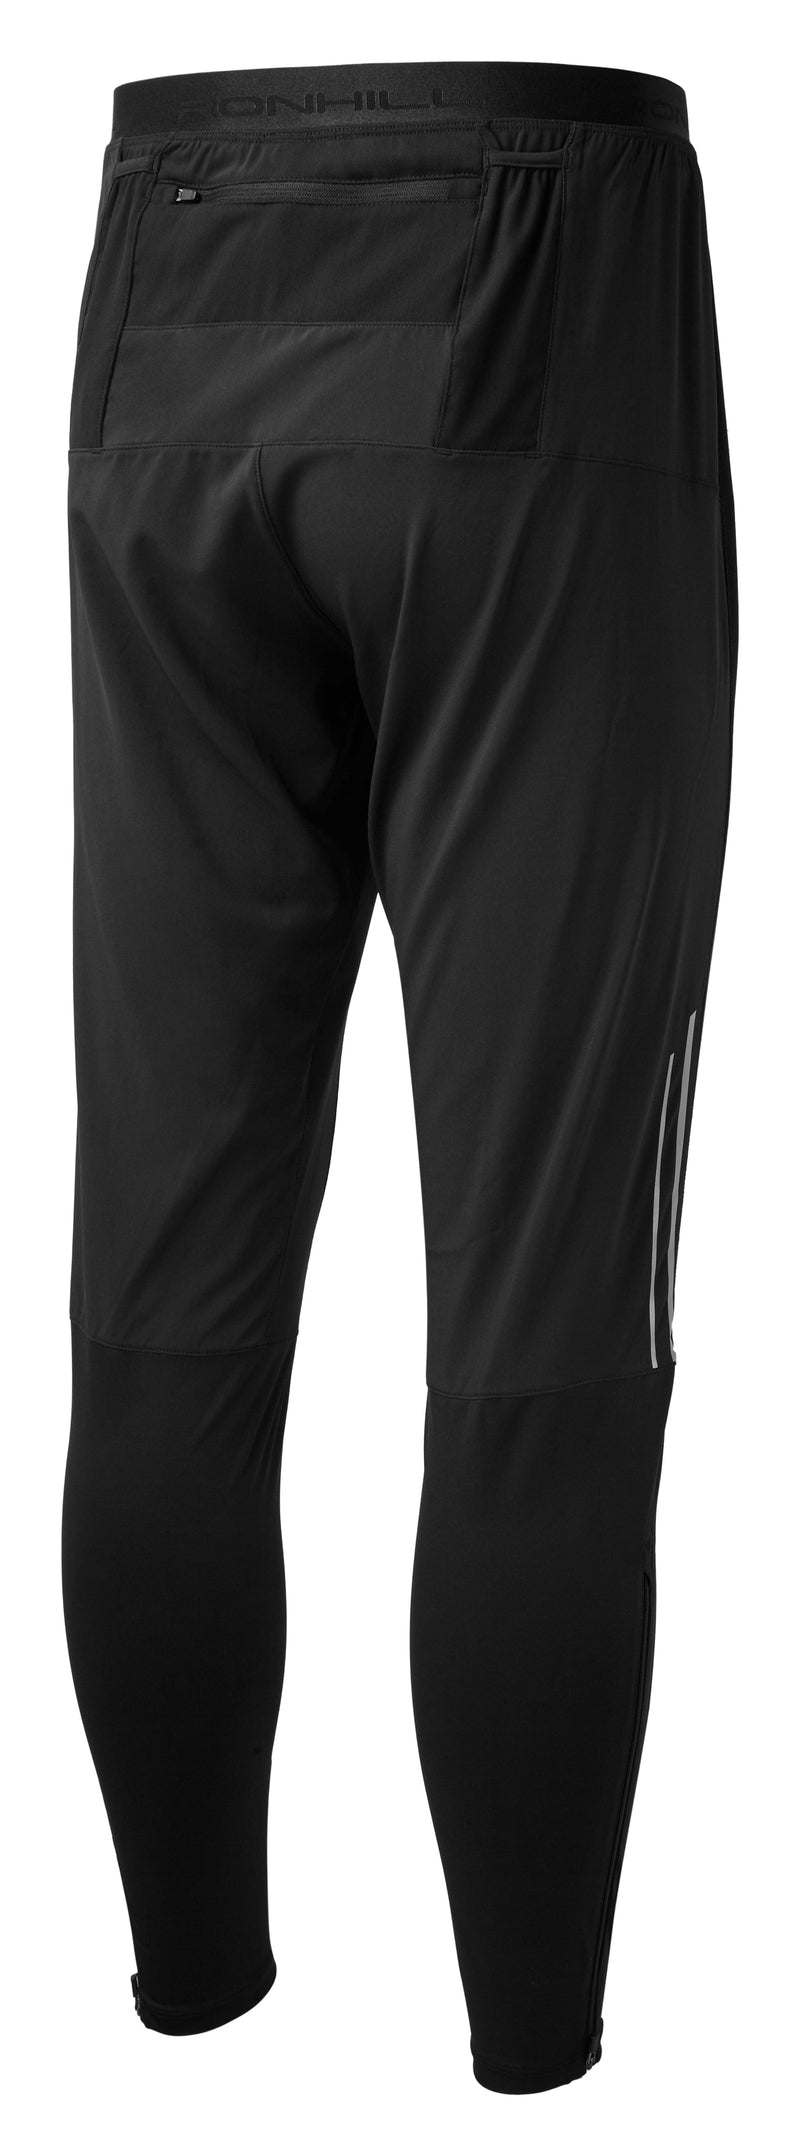 Ronhill Clothing Ronhill Men's Out Tech Flex Pant - Up and Running